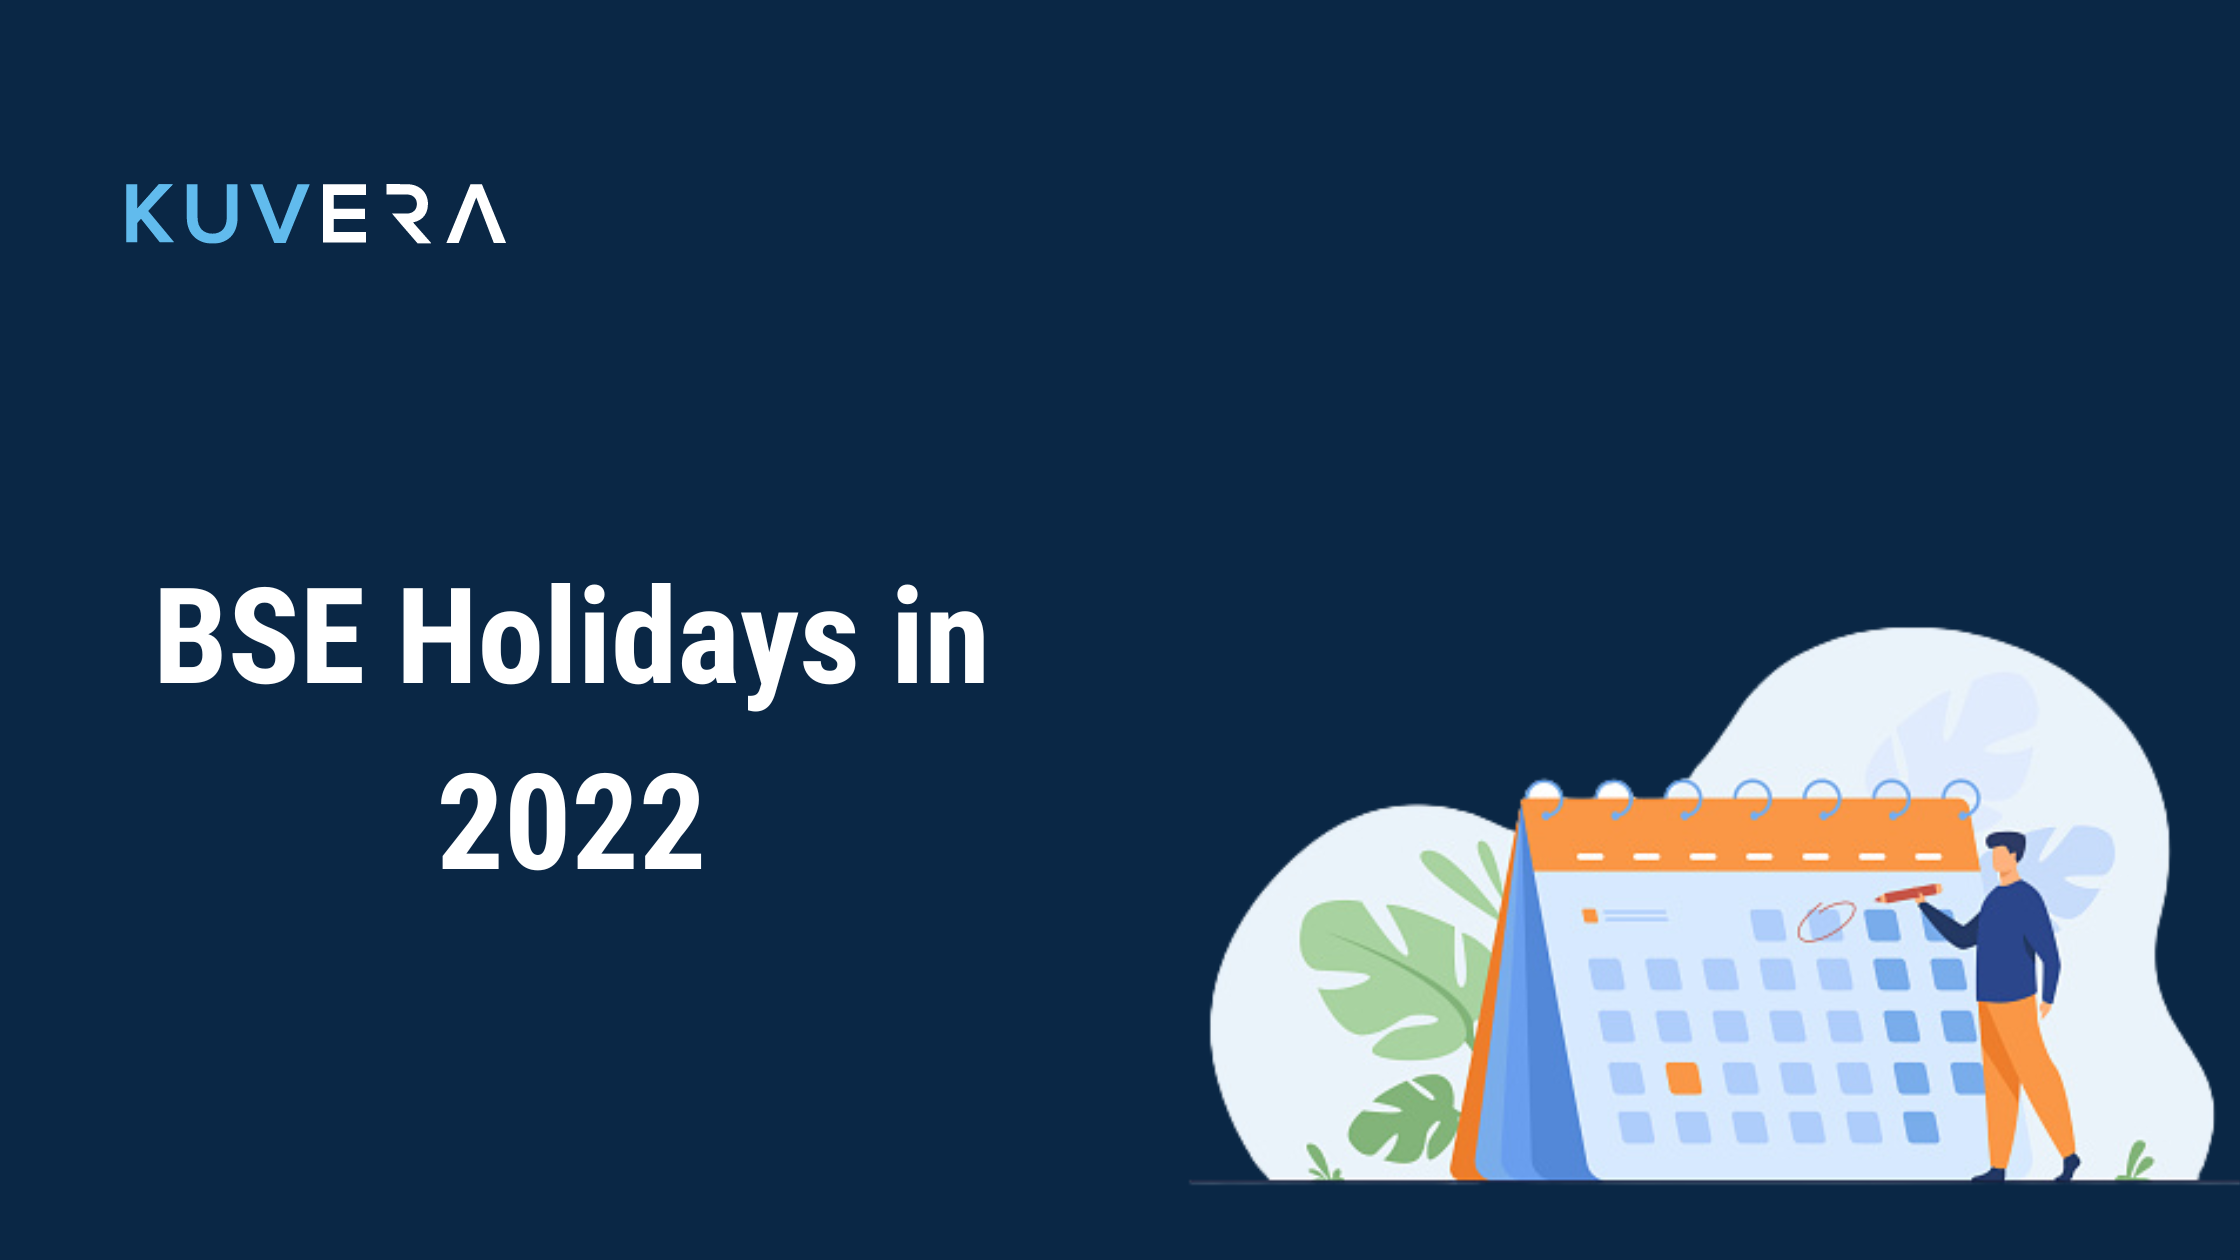 BSE Holidays in 2022 Kuvera